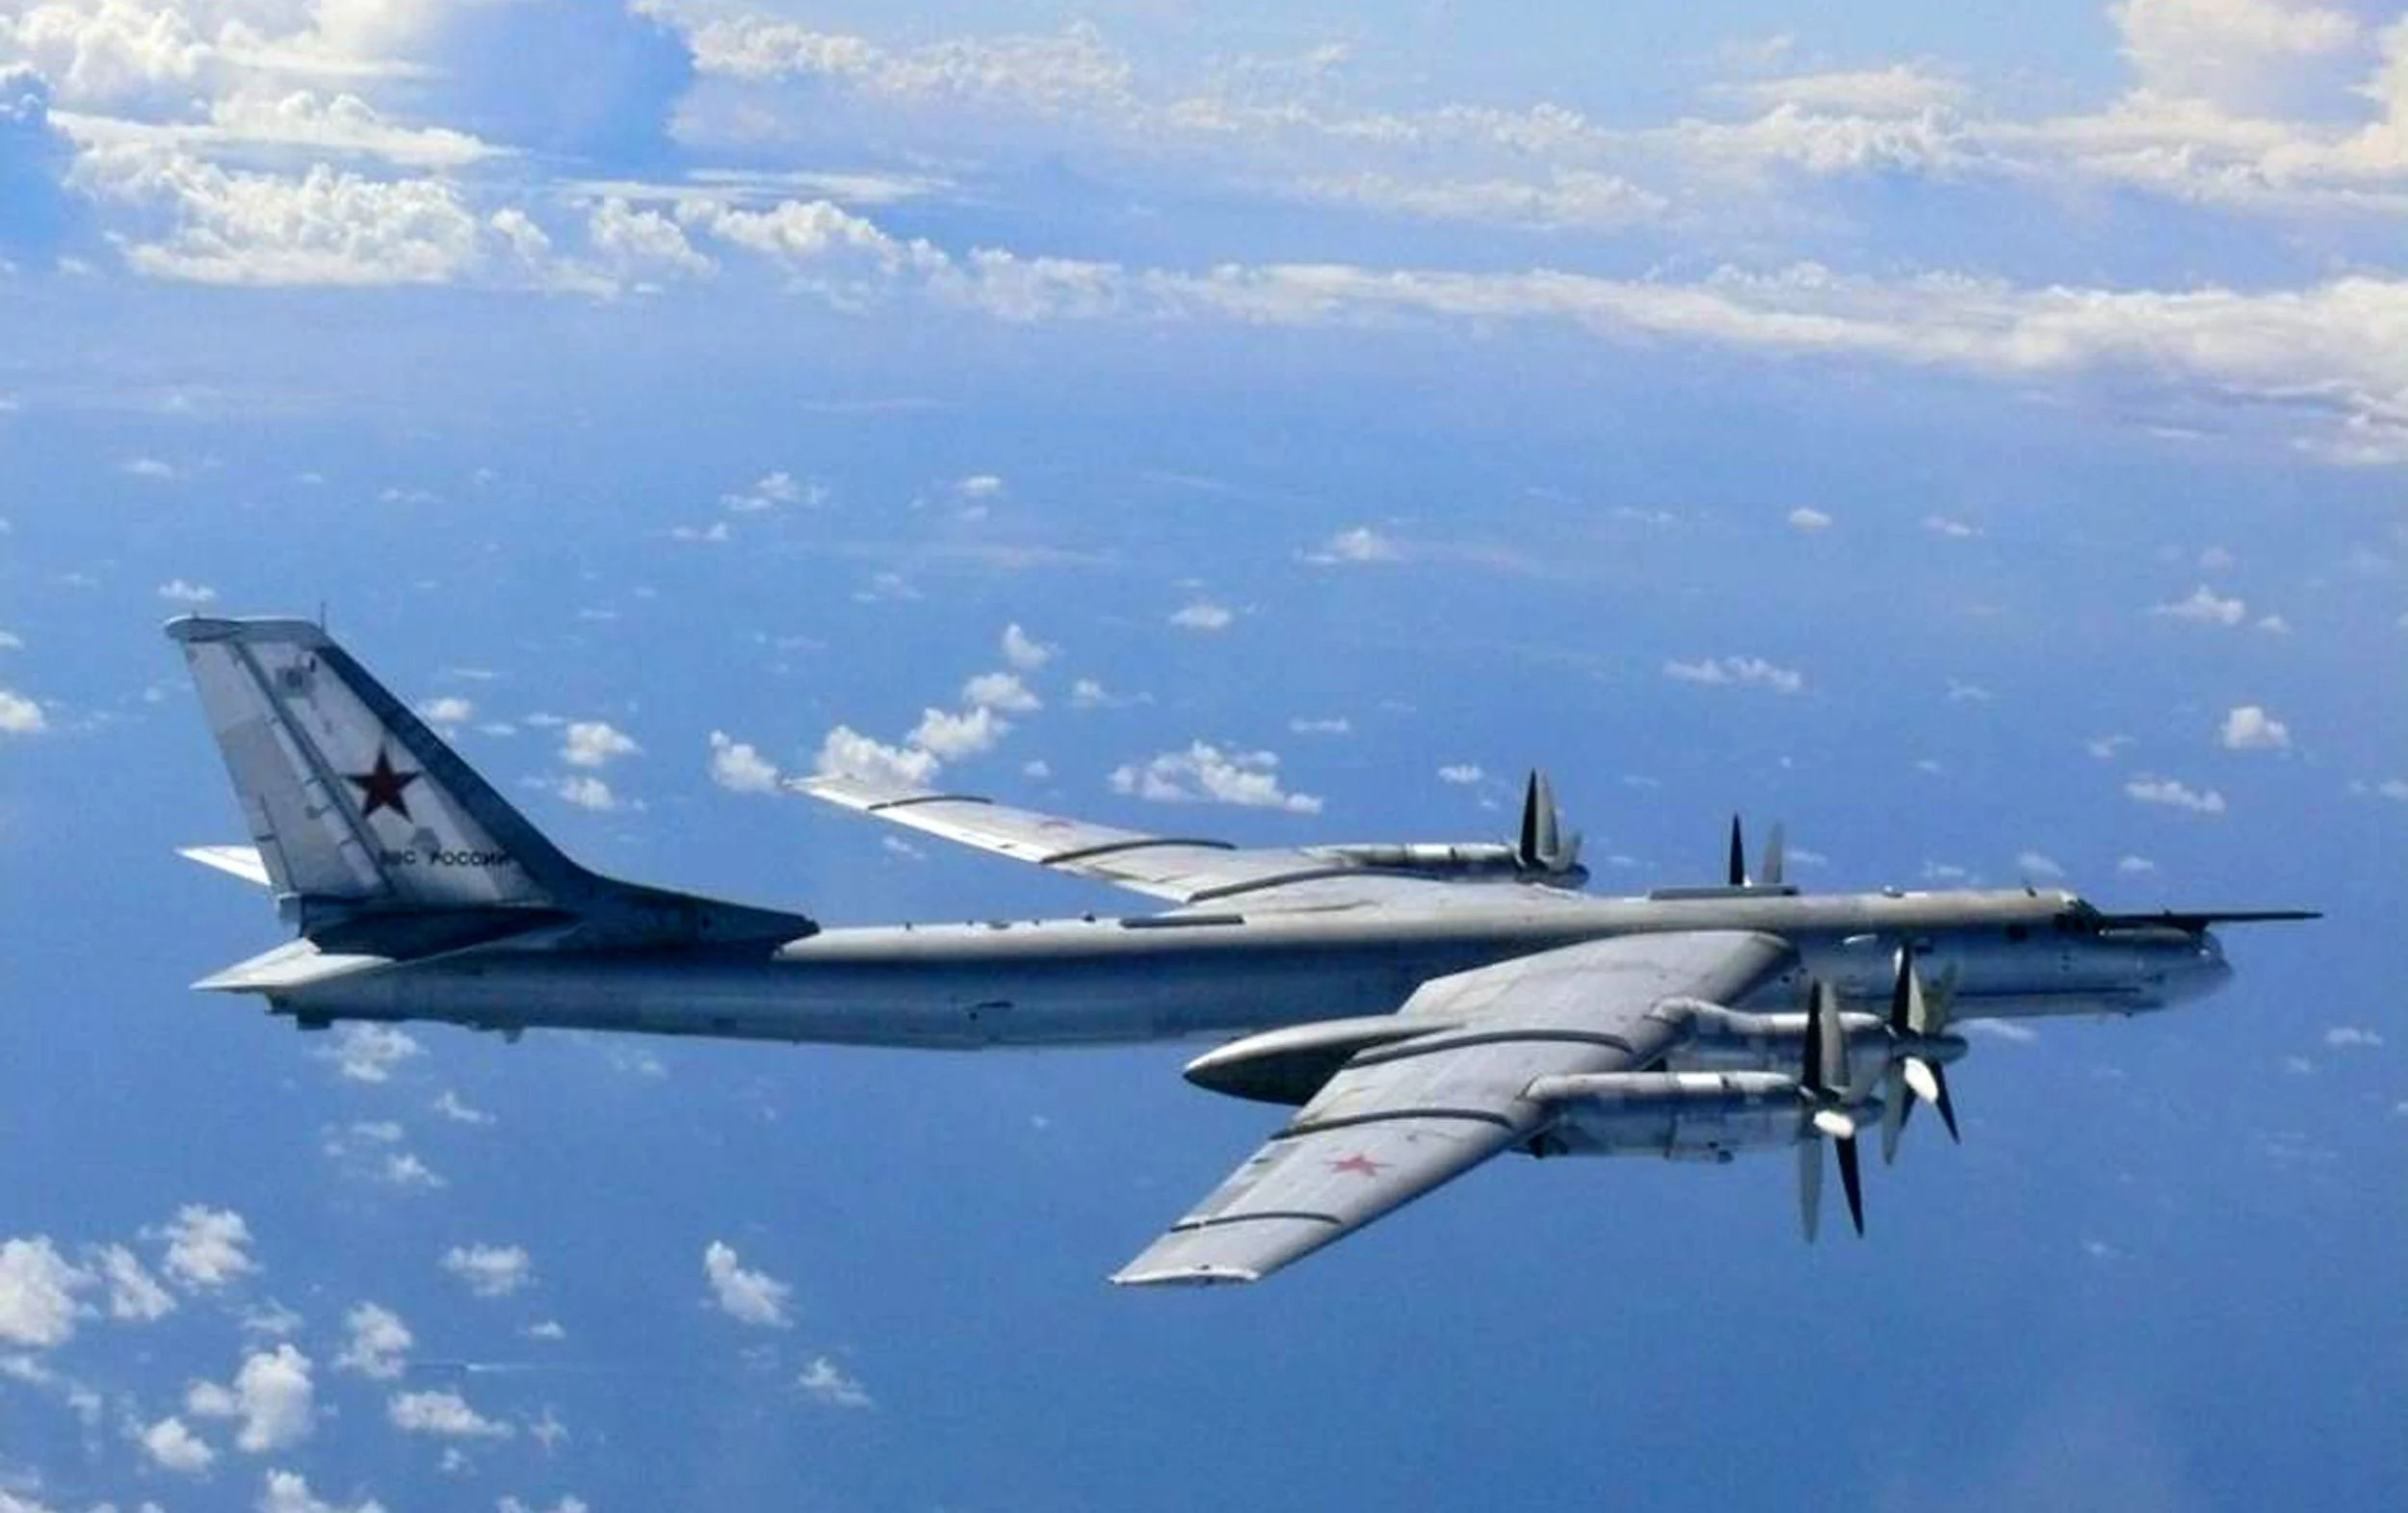 A Russian bomber TU-95 flying in airspace near the isle of Okinoshima in western Japan